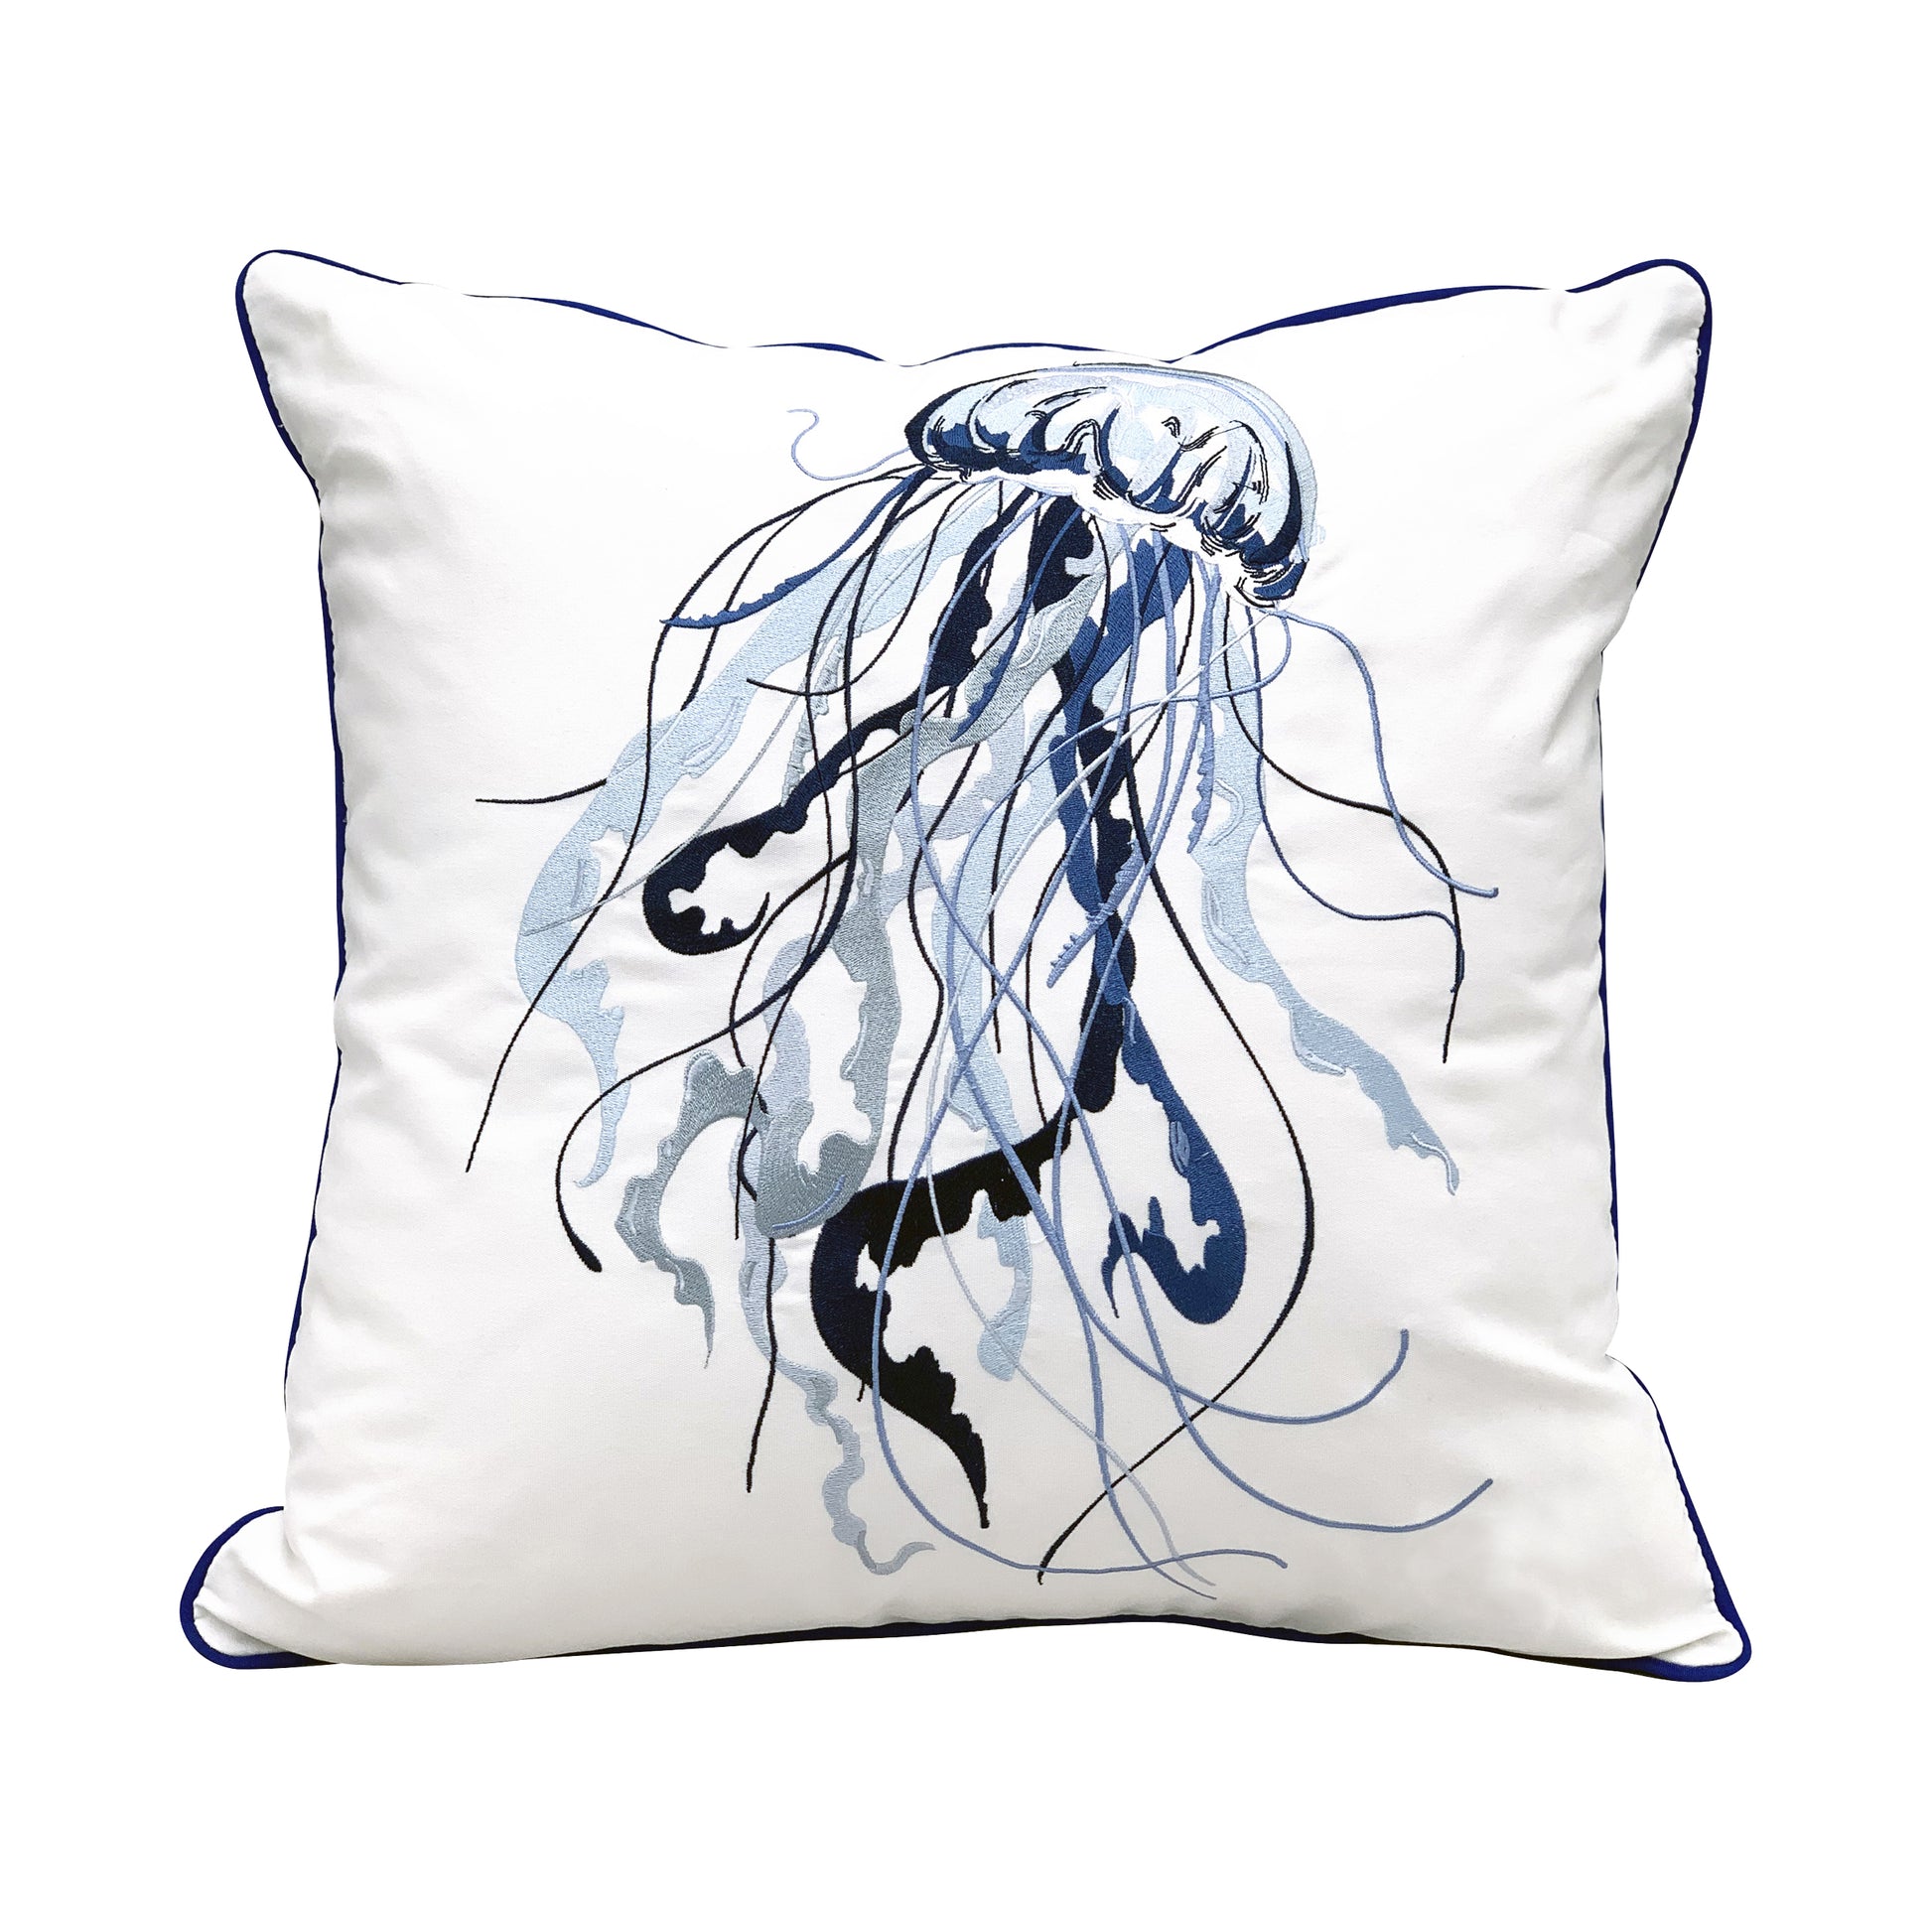 Navy, light blue, and gray jellyfish embroidered on a white ground pillow with navy edged piping.